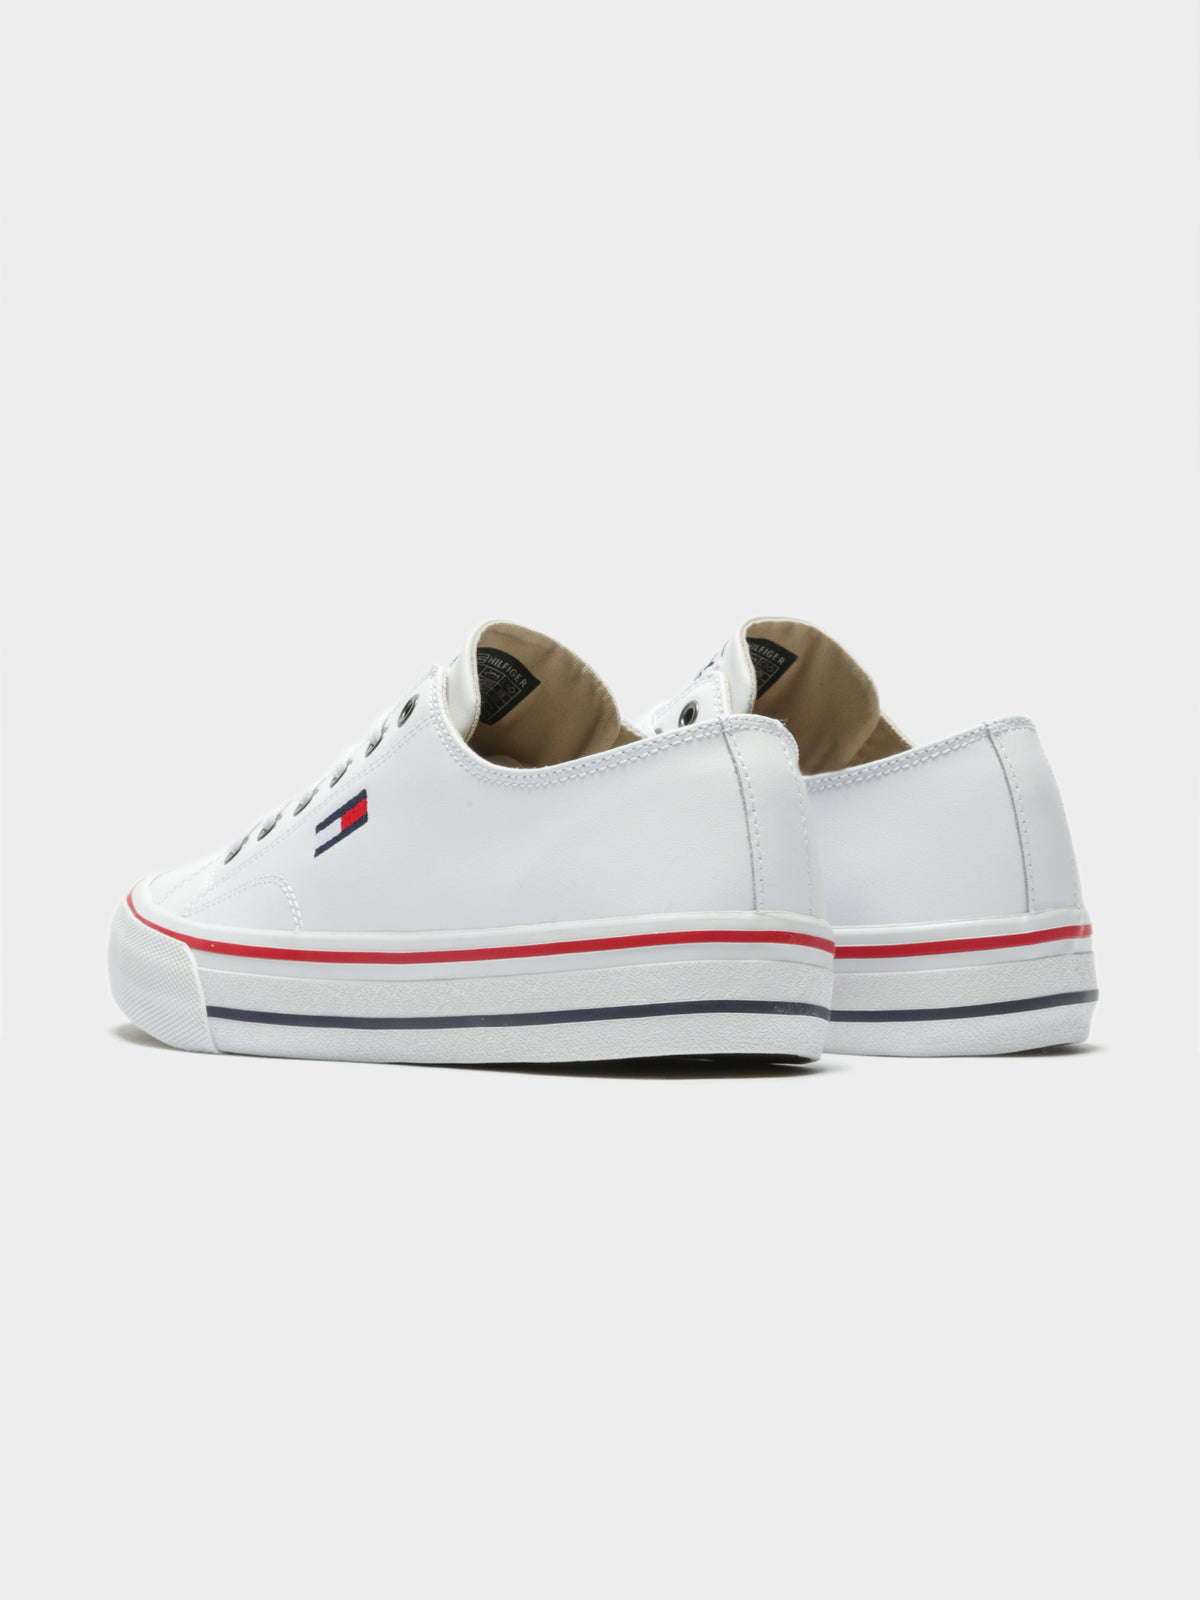 Unisex Leather City Sneakers in White